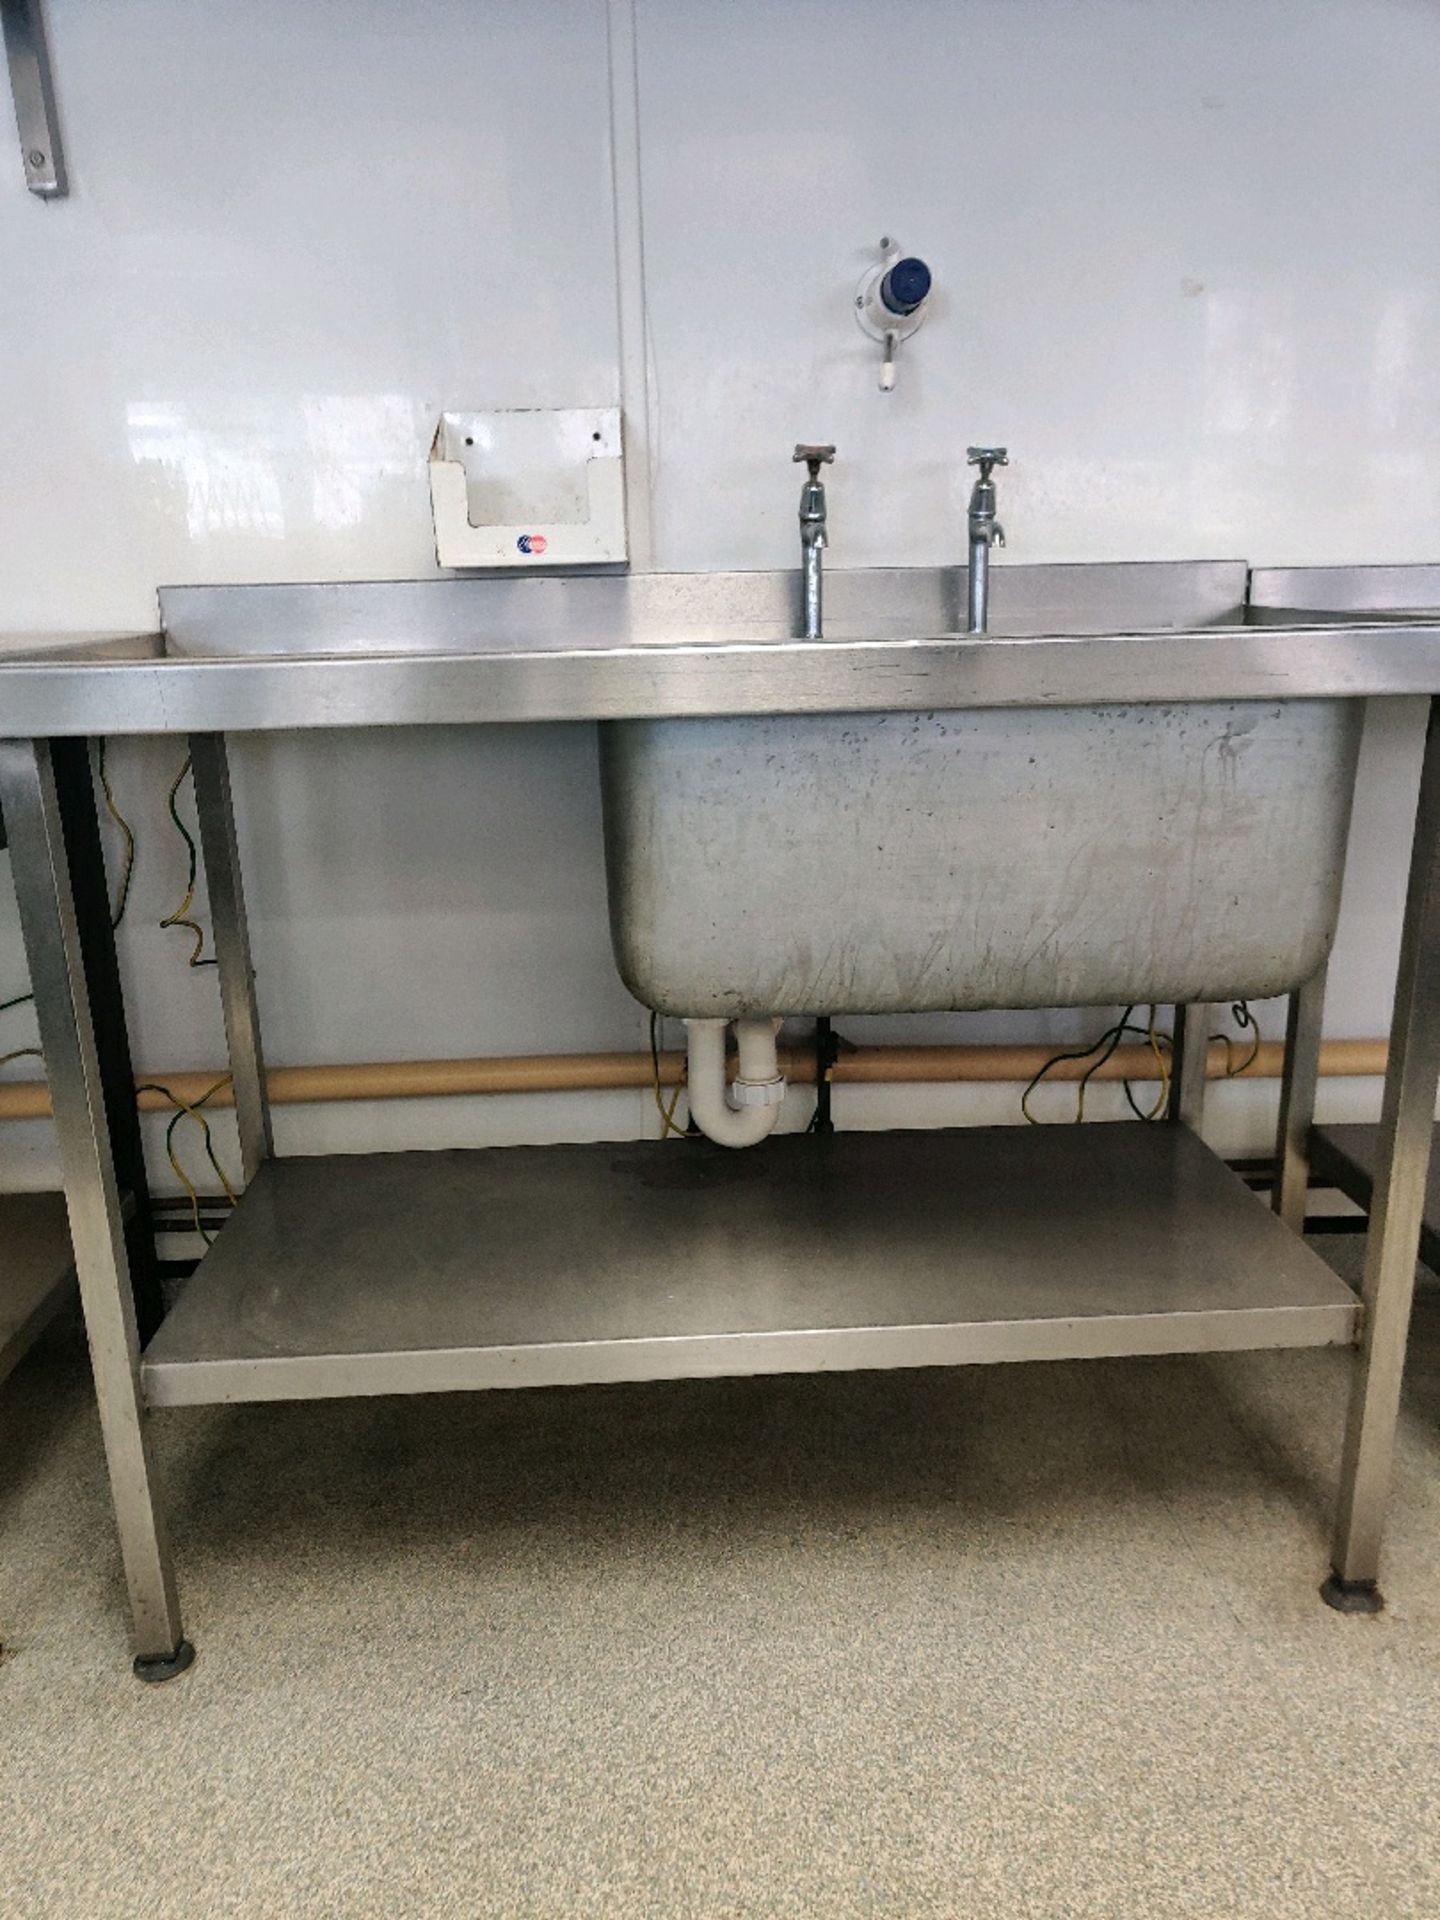 Stainless steel washing station - Image 3 of 3